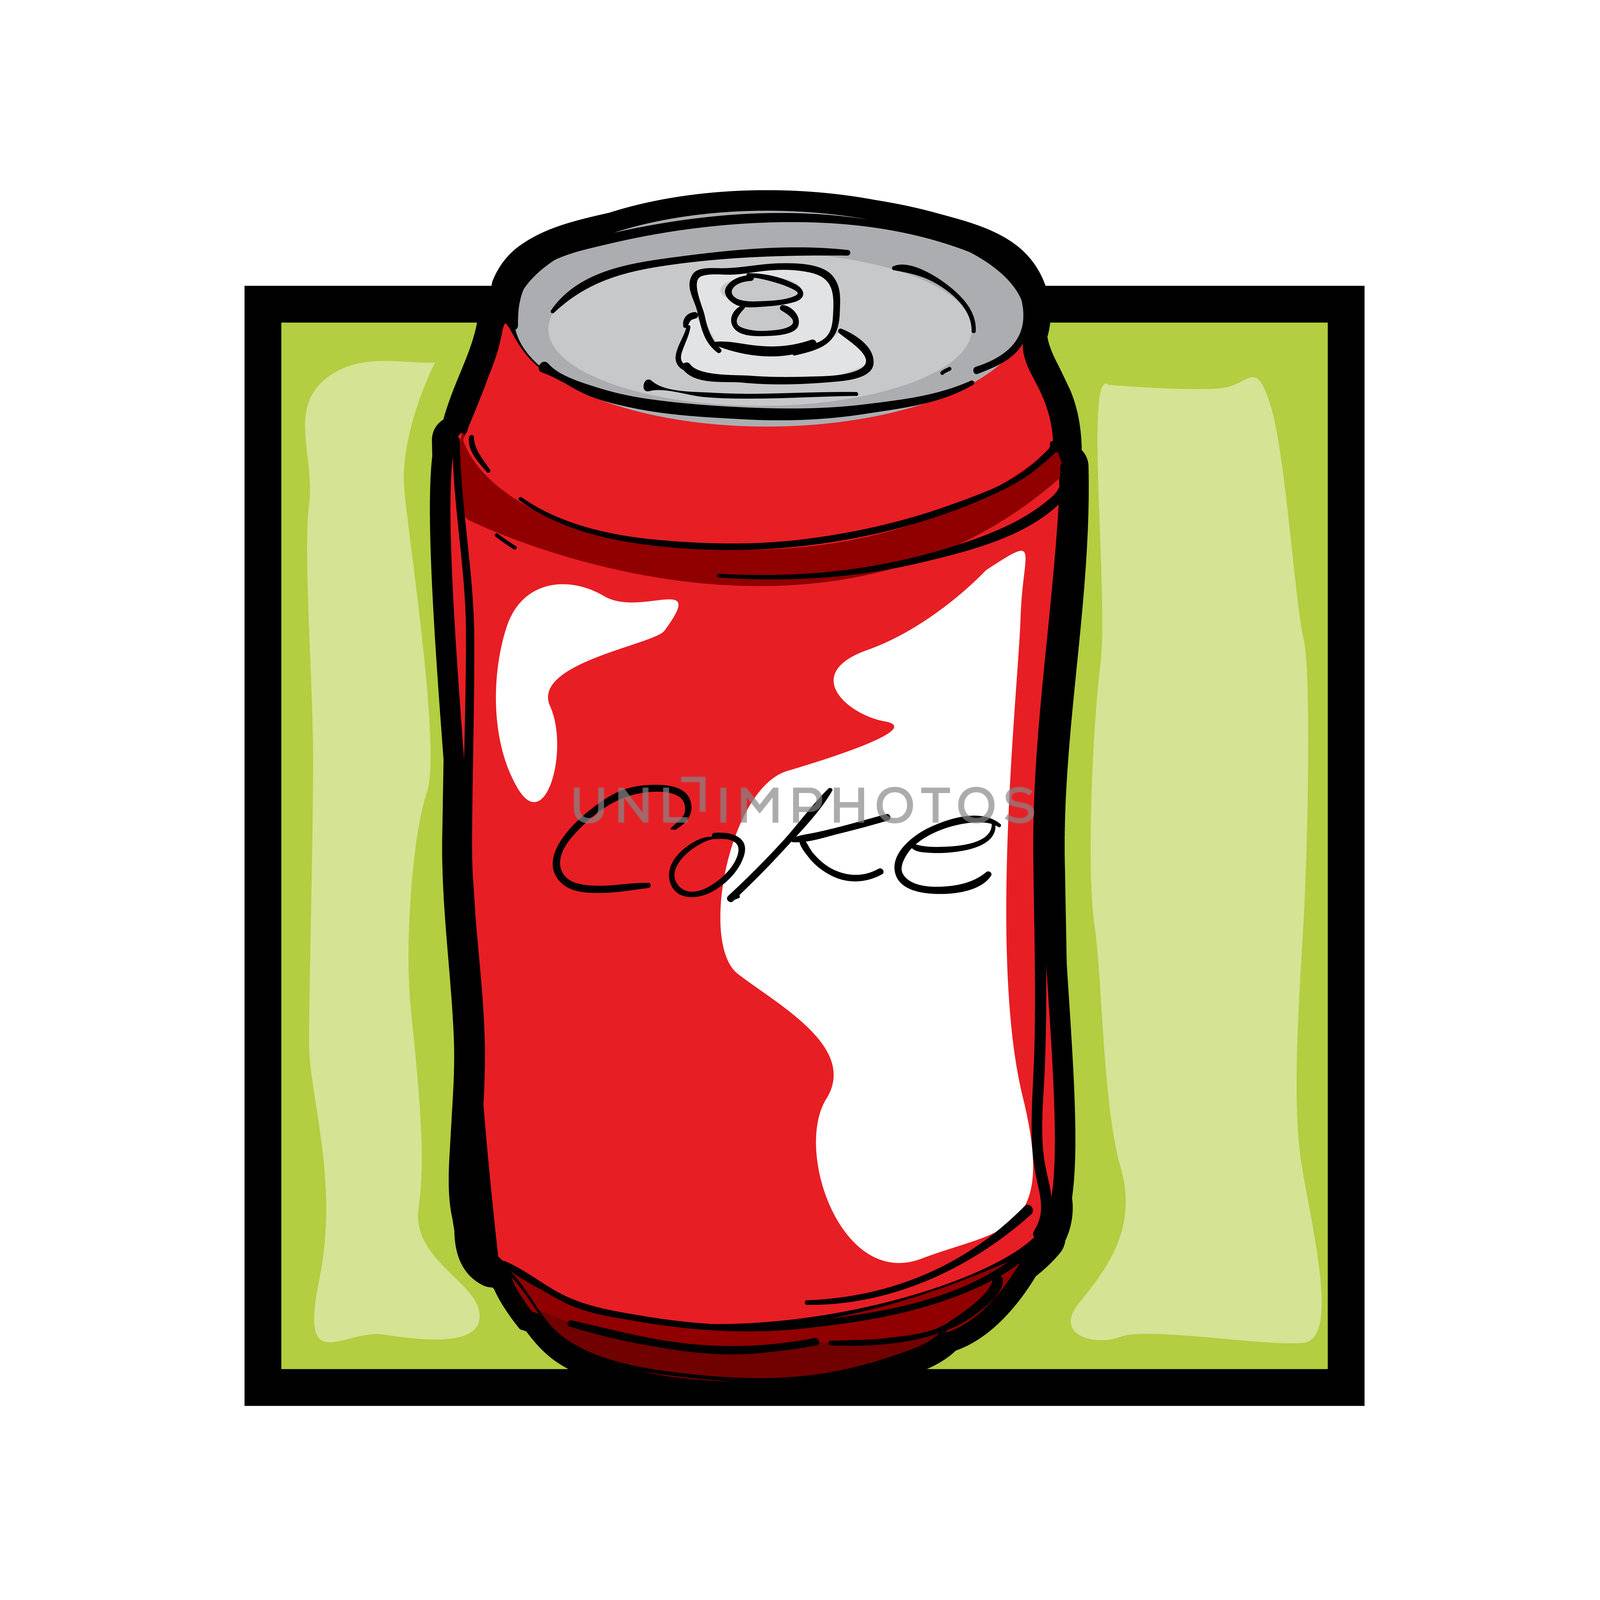 Classic clip art graphic icon with soda can